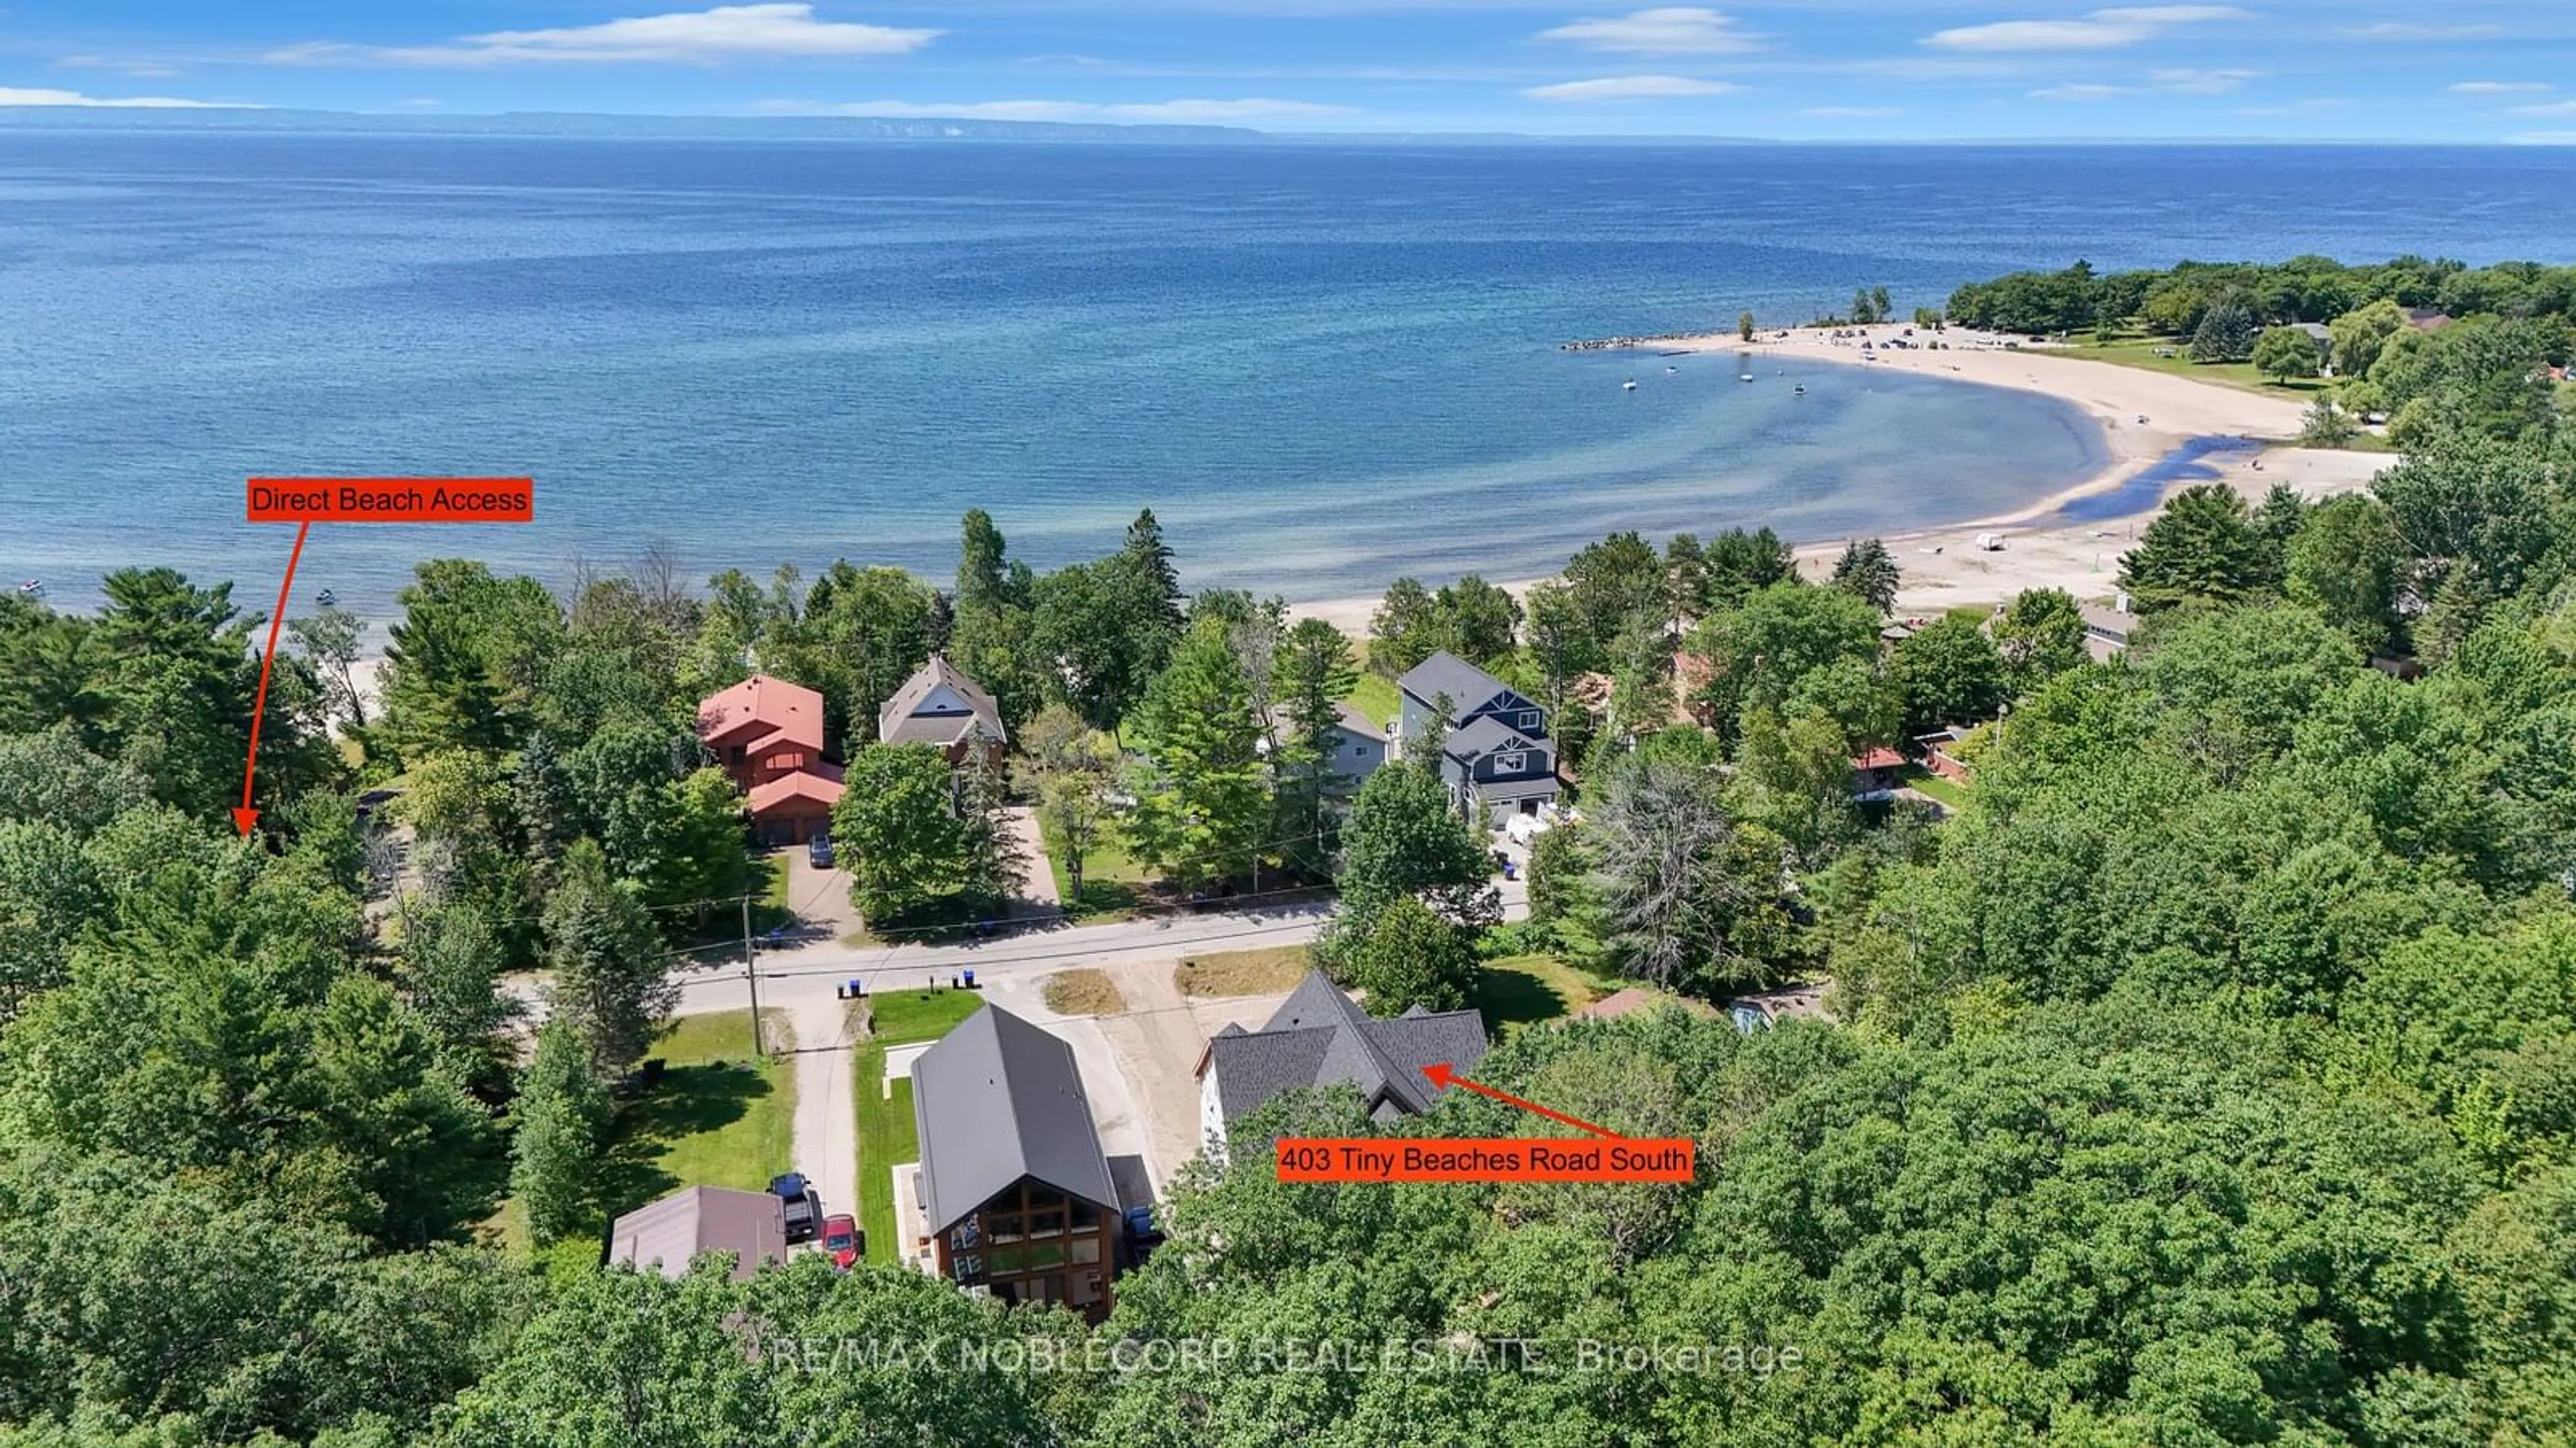 Lakeview for 403 Tiny Beaches Rd, Tiny Ontario L0L 2J0